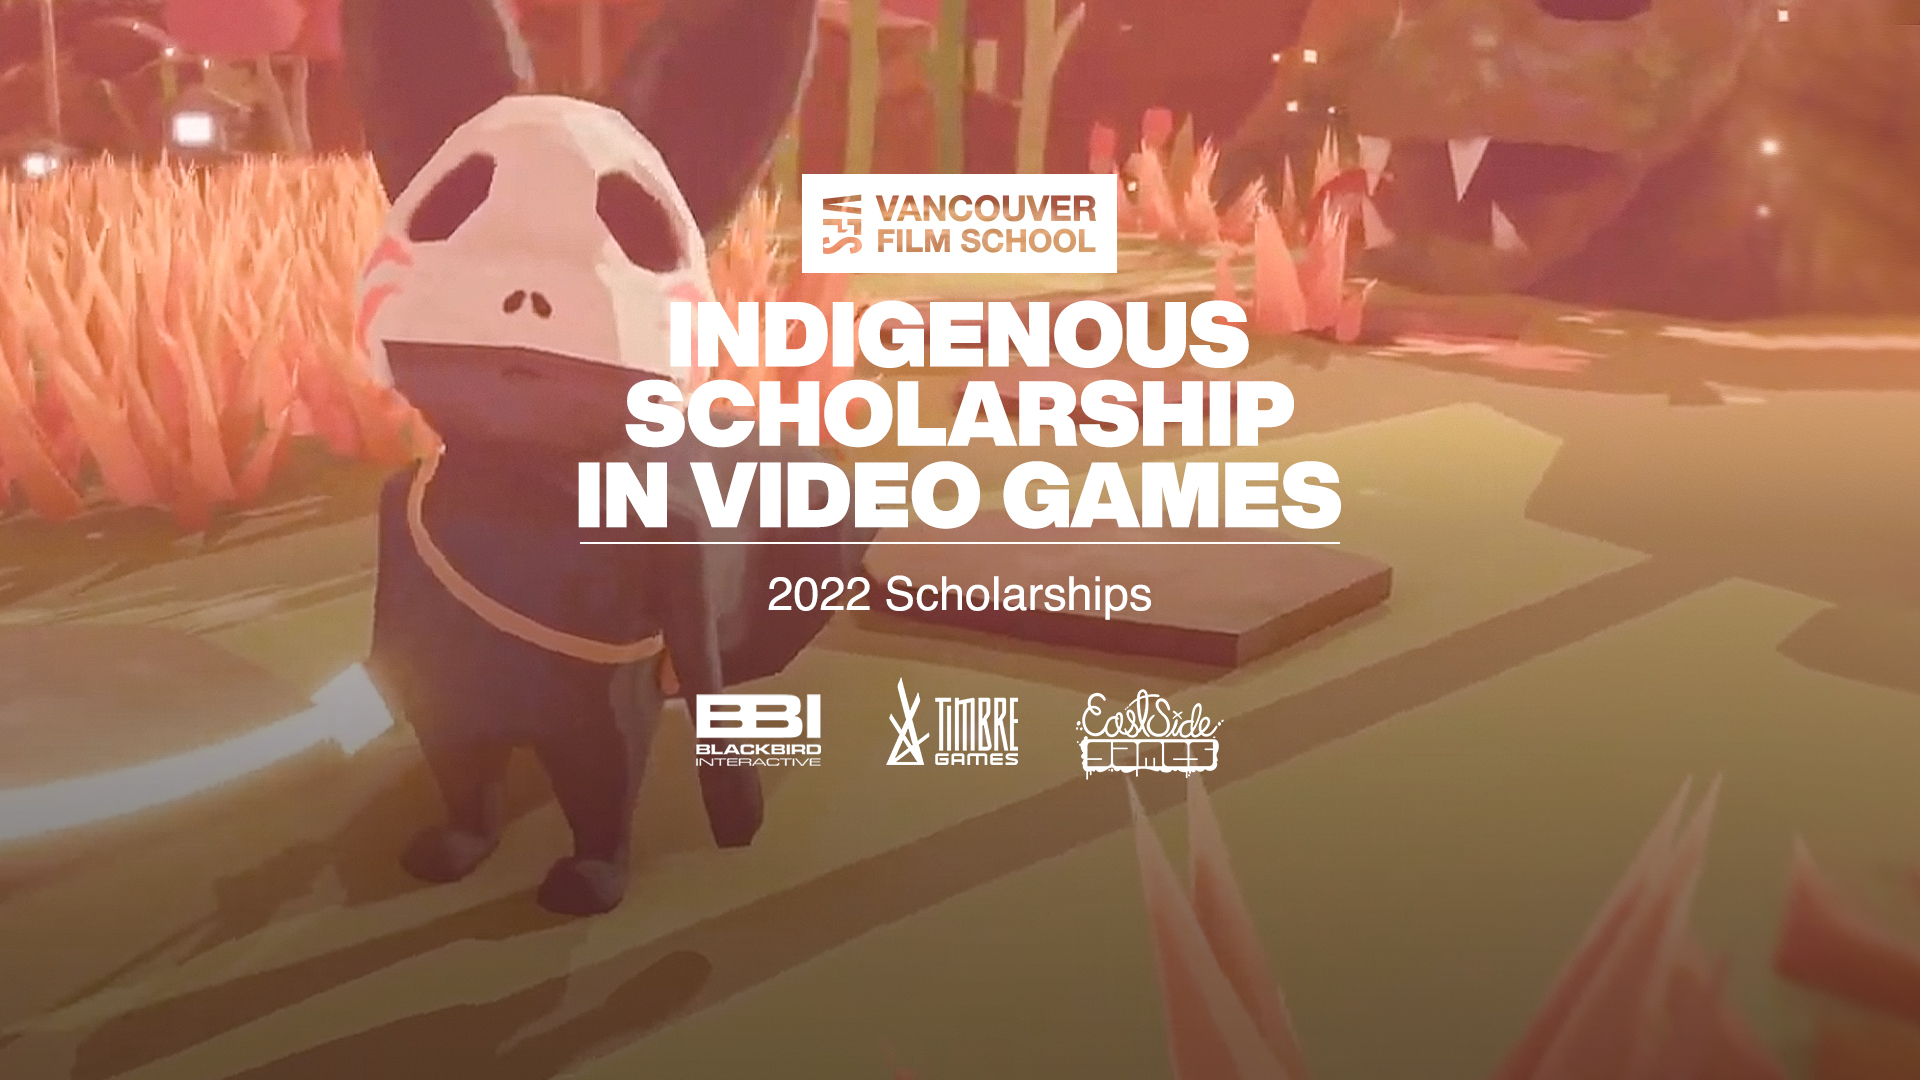 VFS Partners with Blackbird Interactive, East Side Games, and Timbre Games for $200,000 Indigenous Scholarship in Video Games Fund